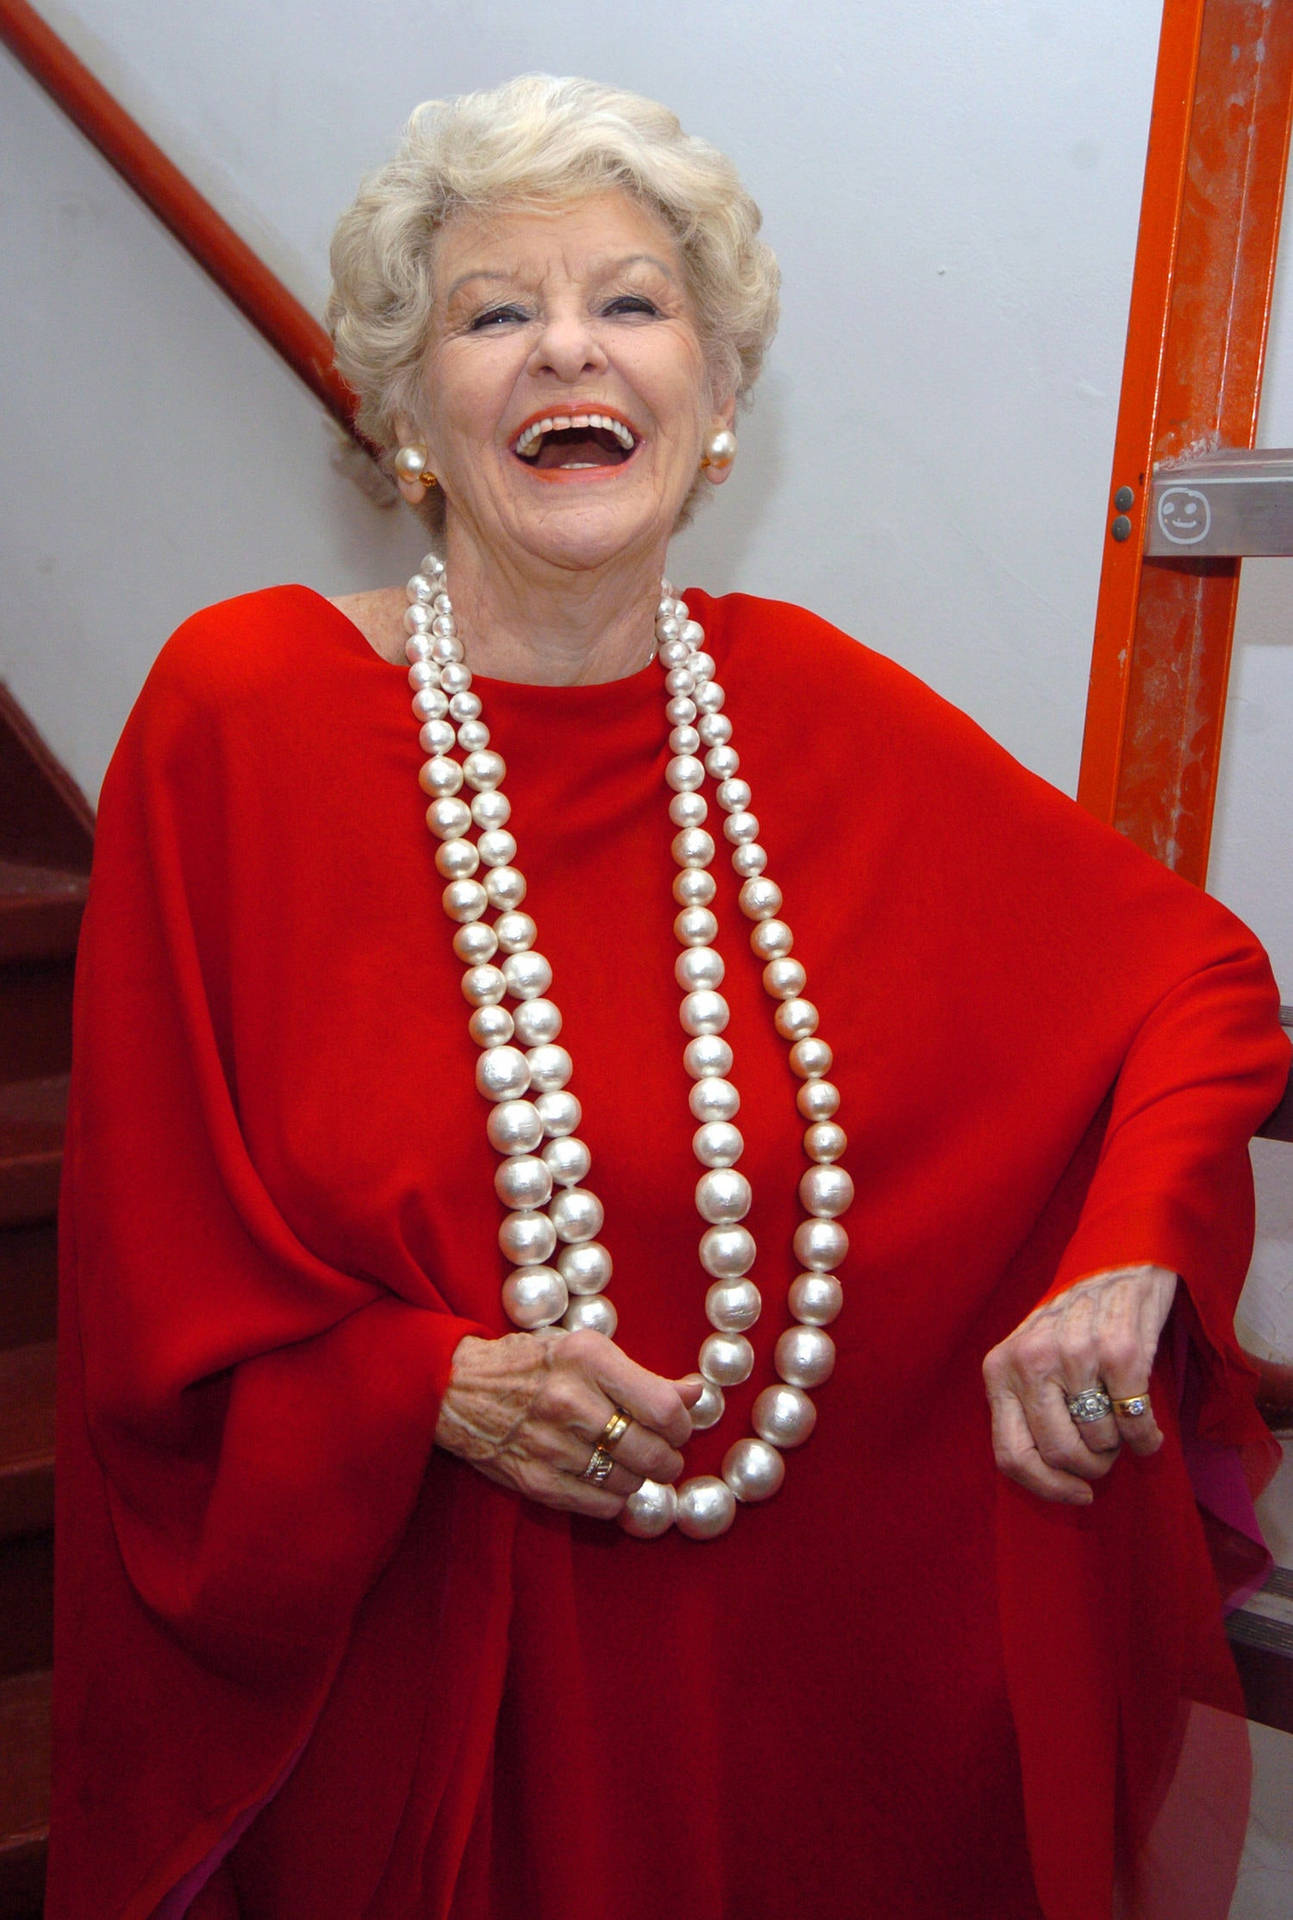 Elaine Stritch Laughing In A Loose Red Top Wallpaper